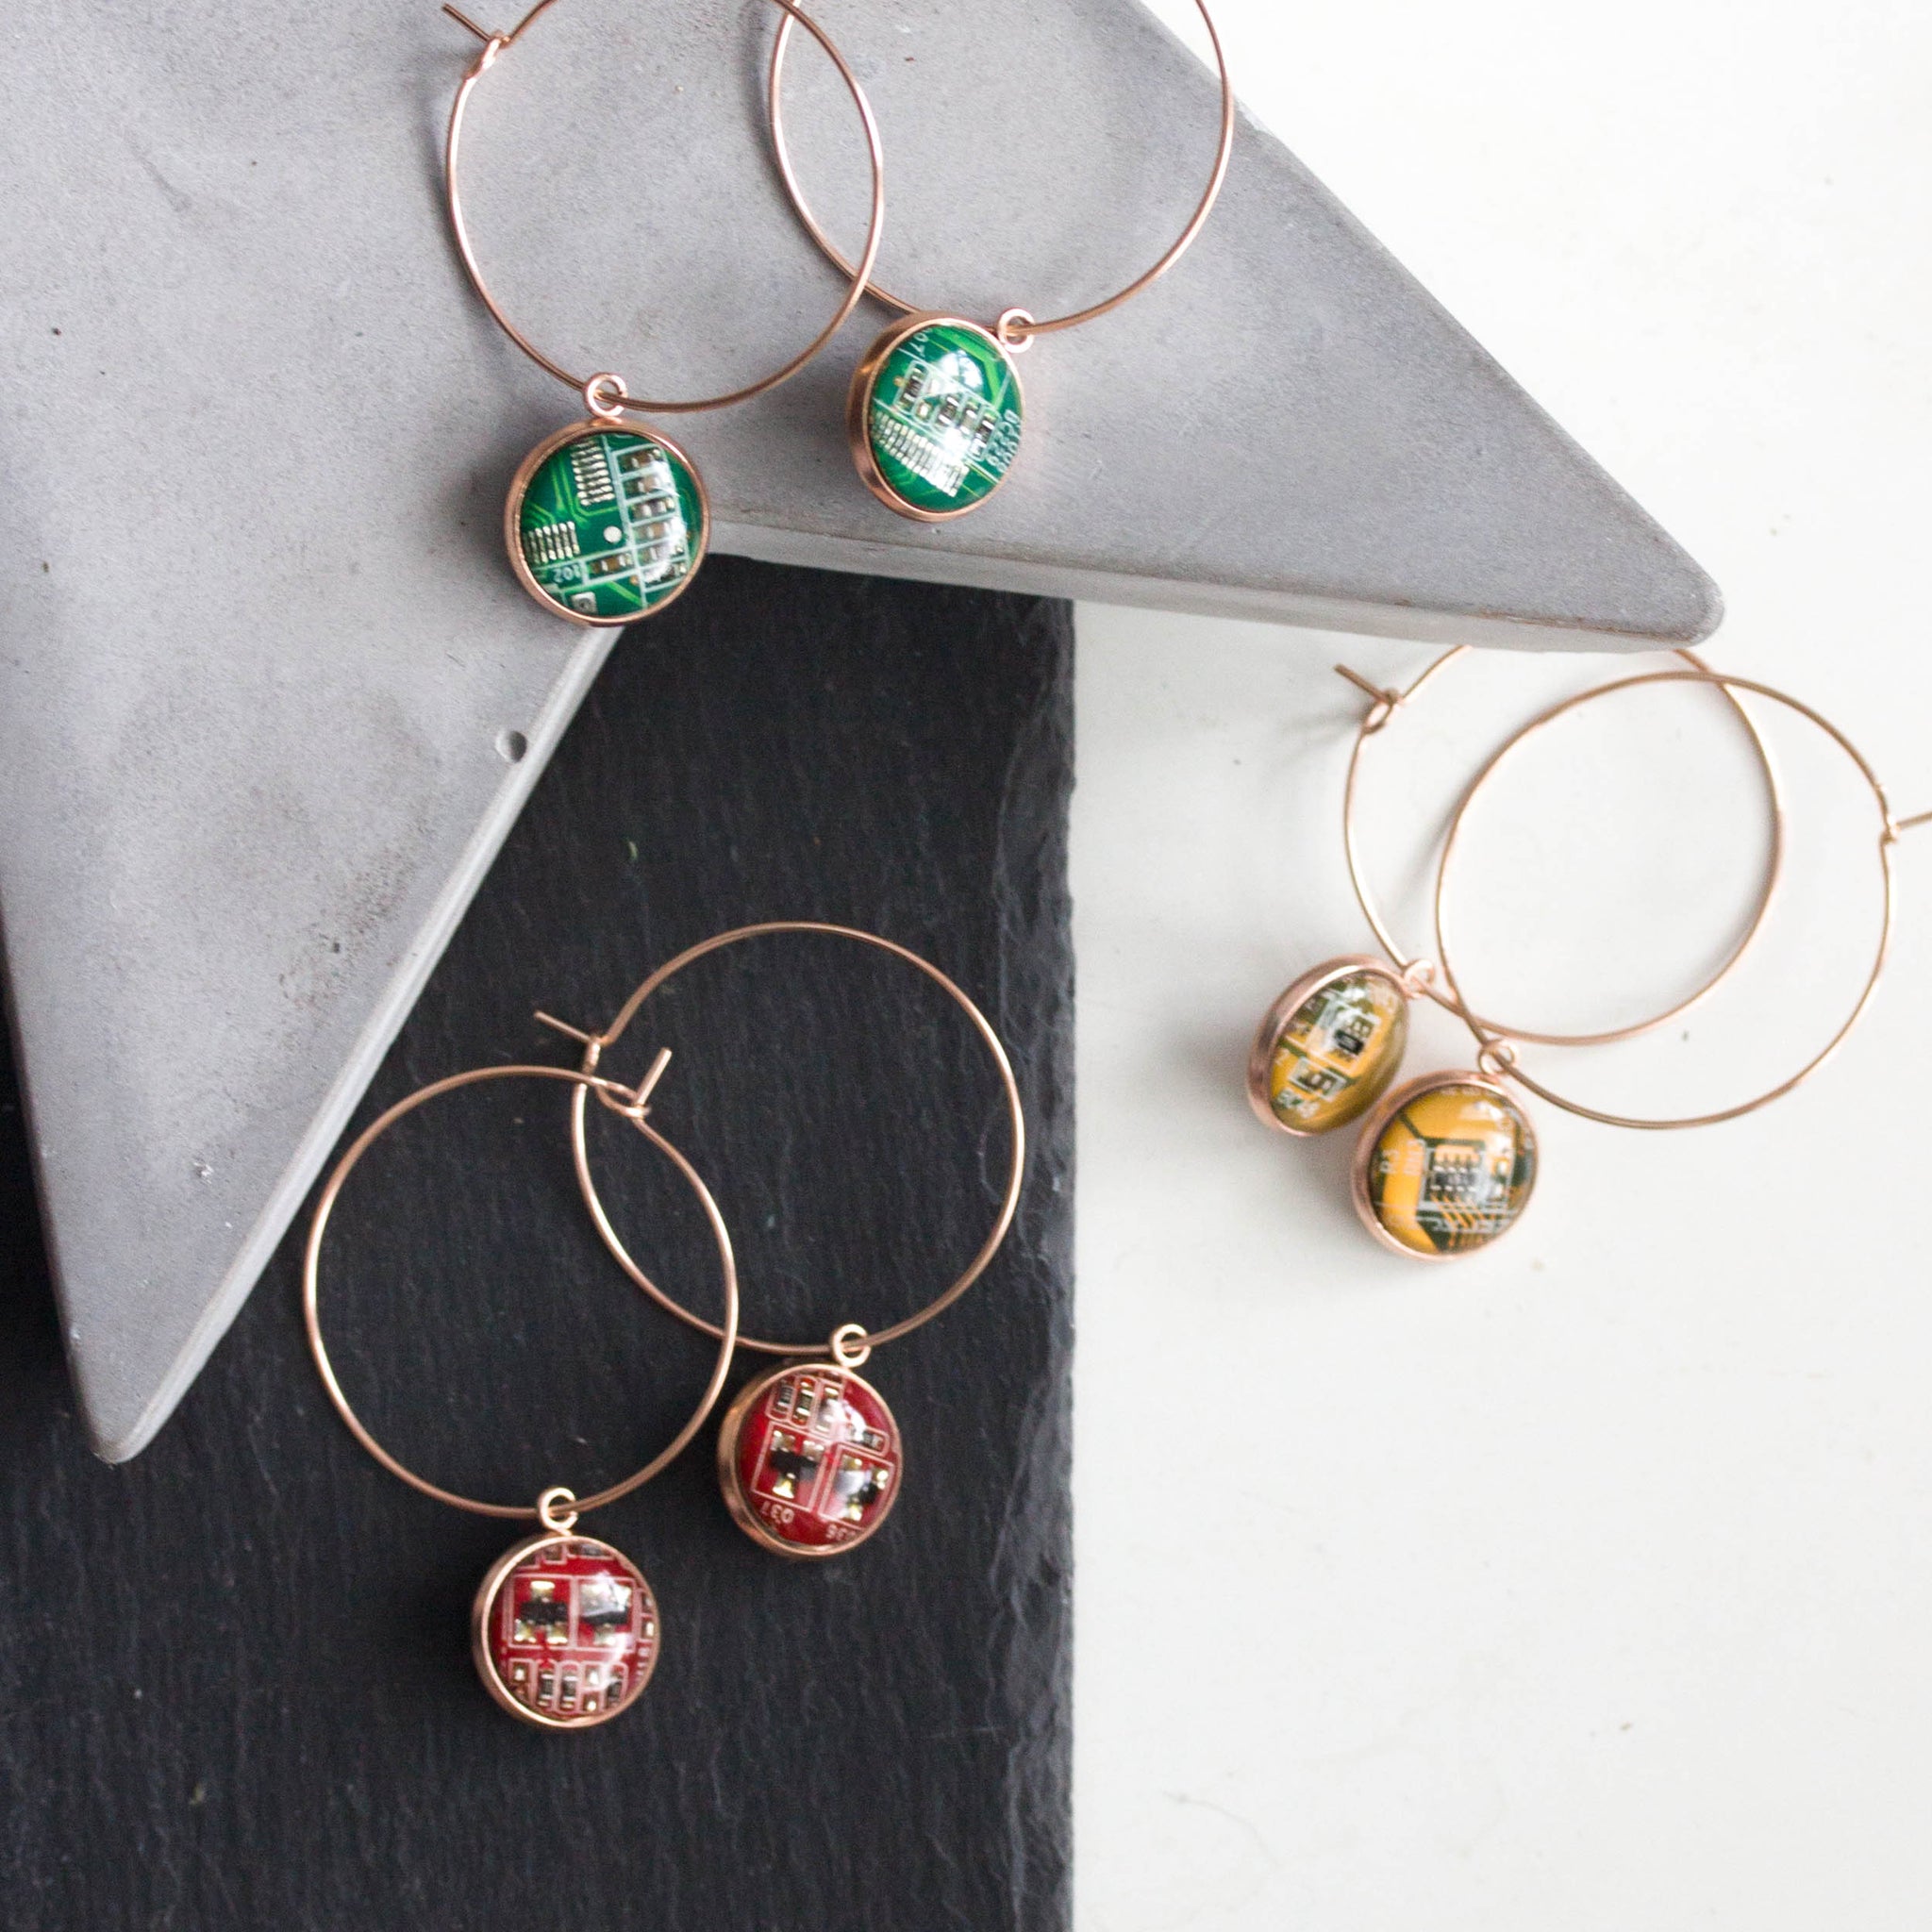 Hoop earrings with 12mm round circuit board pendants, rose gold colored wires